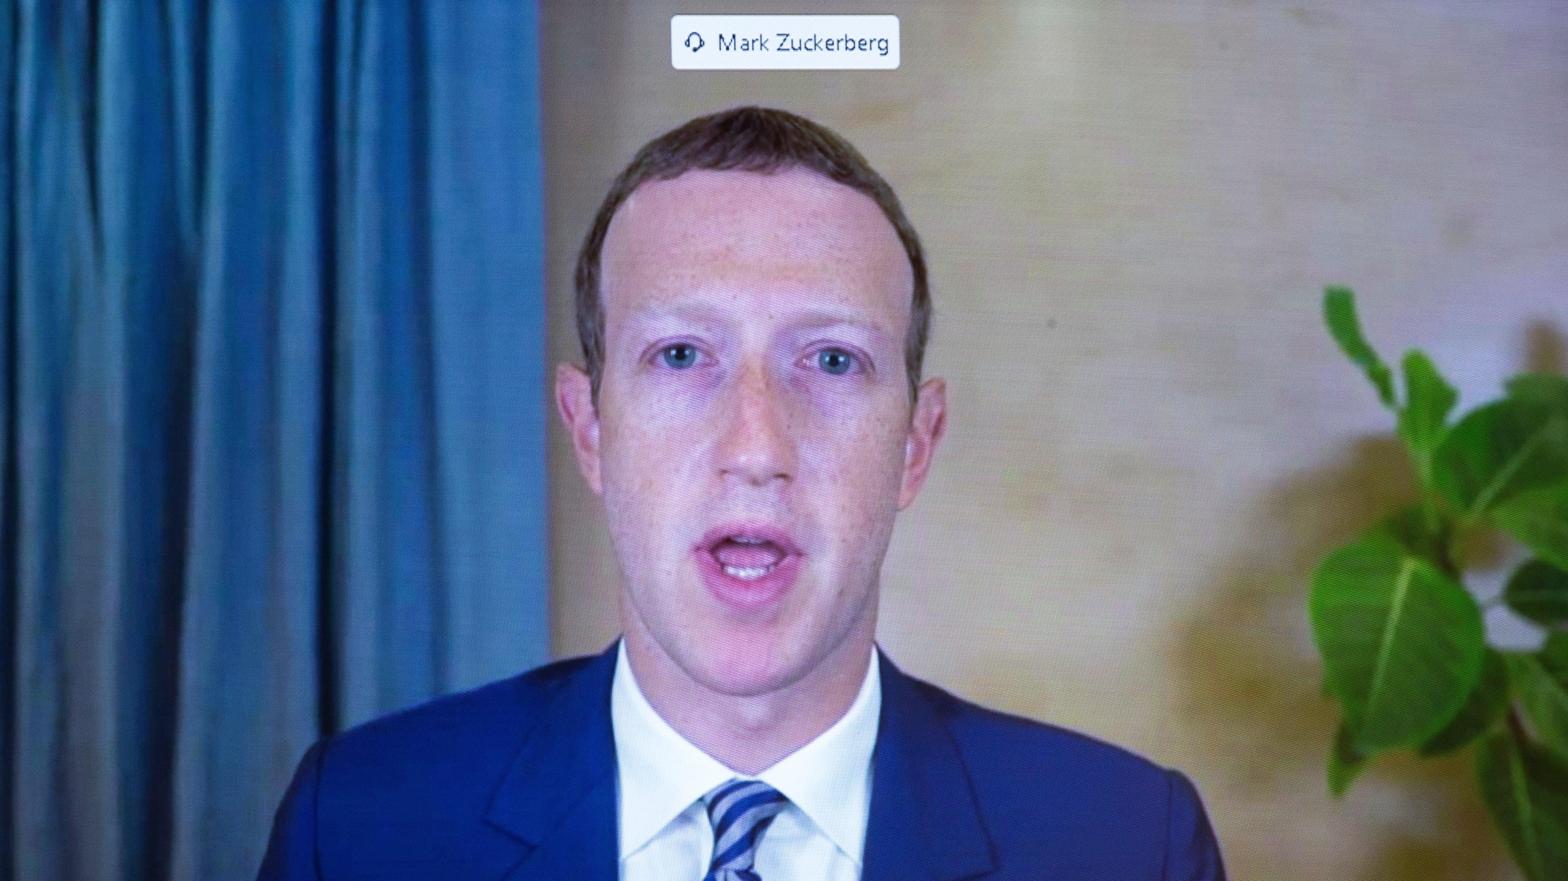 This screen photo from 2020 is from a real Mark Zuckerberg, we swear... we hope.  (Photo: Michael Reynolds-Pool, Getty Images)